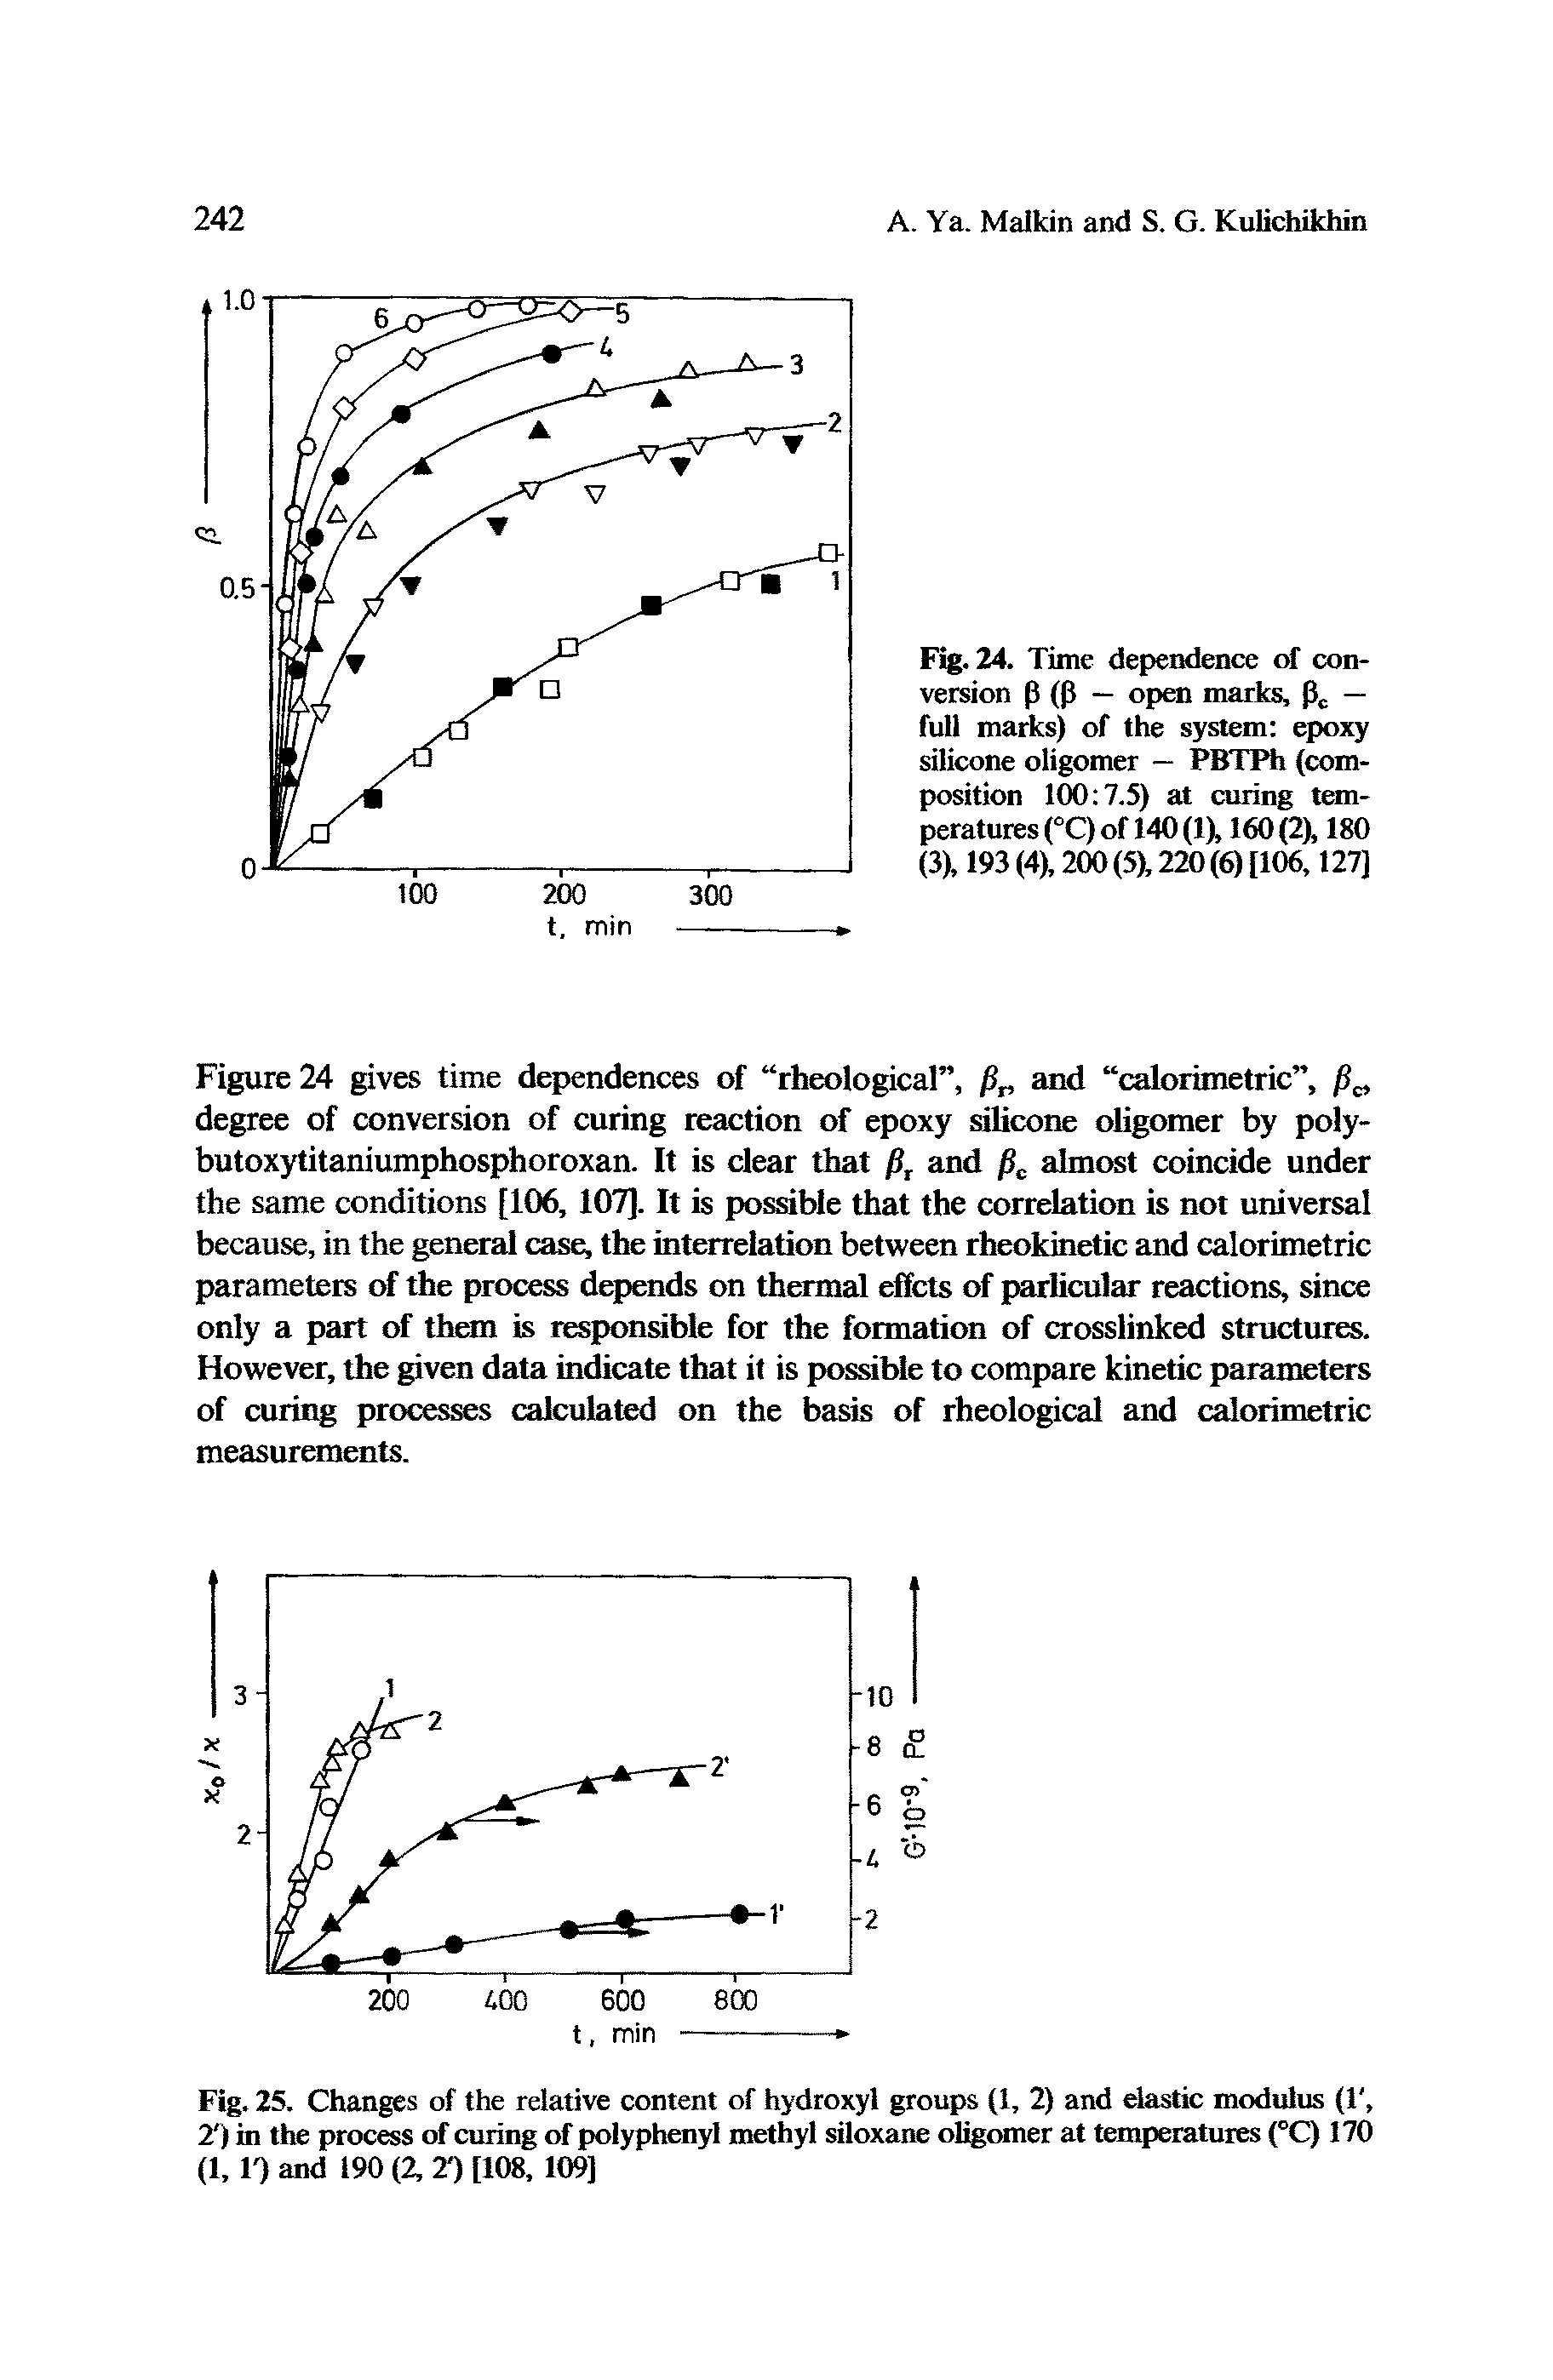 Fig. 24. Time dependence of conversion p (p — open marks, p — full marks) of the system epoxy silicone oligomer — PBTPh (composition 100 7.5) at curing temperatures (°C) of 140 (IX160 (2), 180 (3), 193 (4), 200 (5), 220 (6) [106,127]...